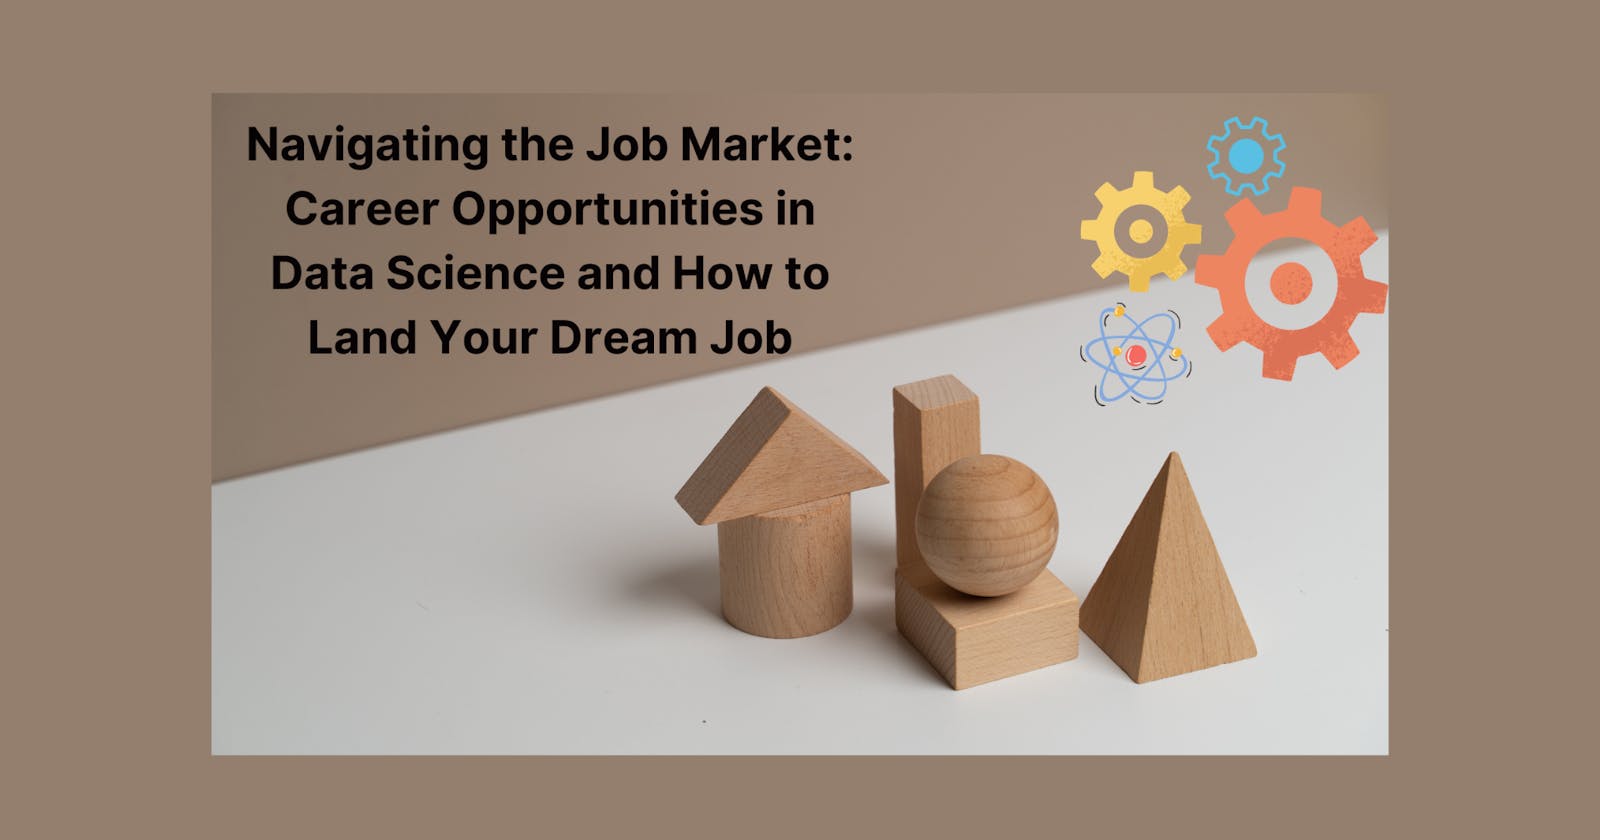 Navigating the Job Market: Career Opportunities in Data Science and How to Land Your Dream Job